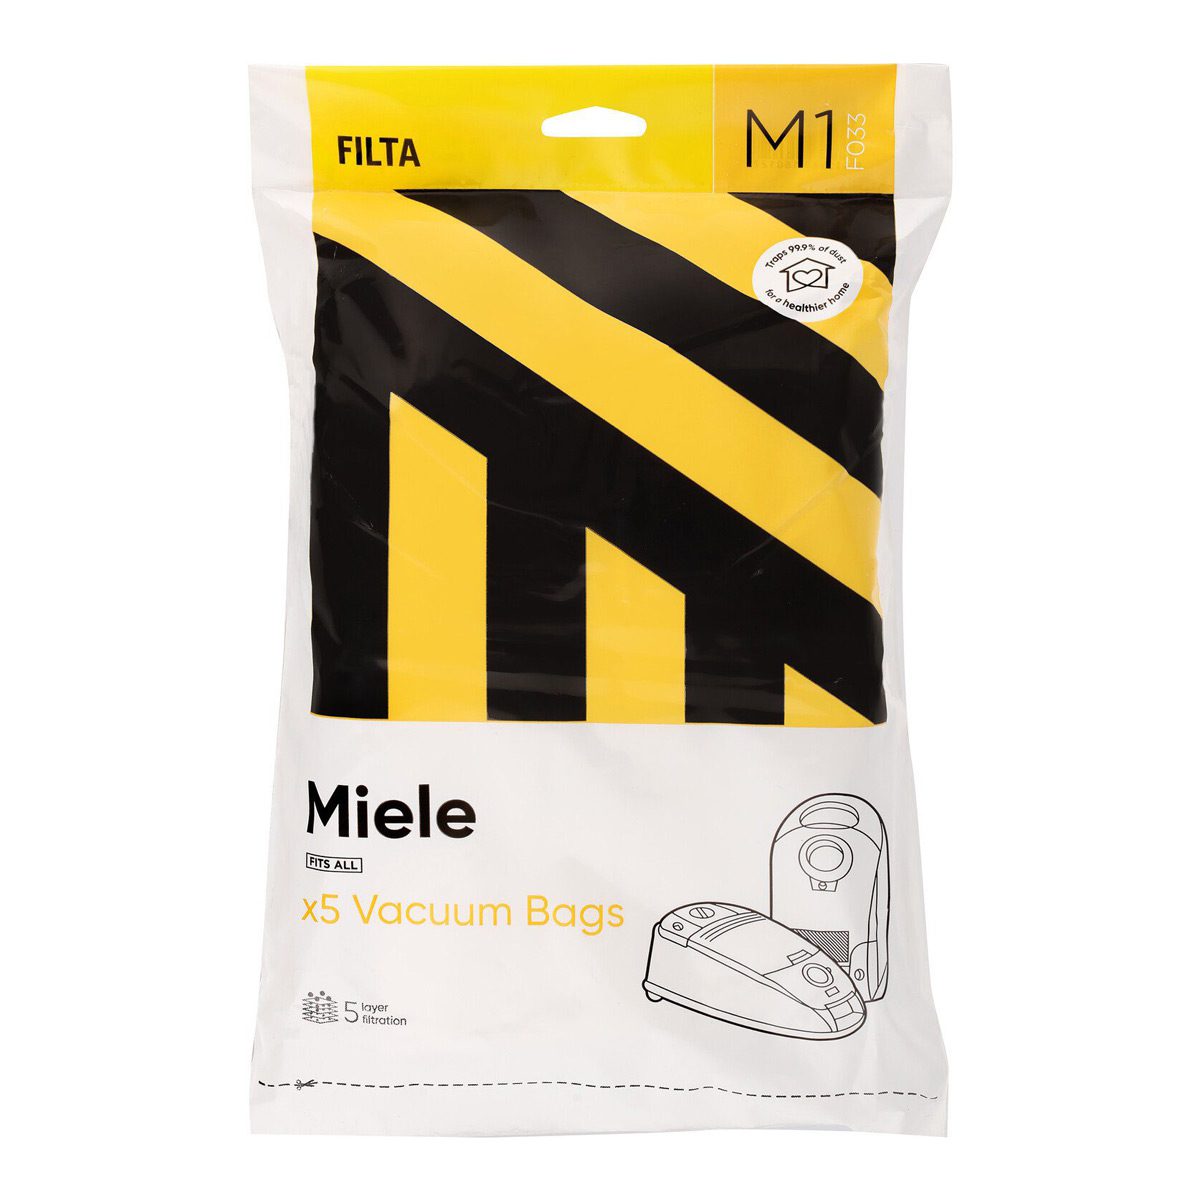 machinery-matting-vac-bags-filta-miele-vacuum-bags-5-pack-F033-unique-SMS-multi-layered-technology-provides-superior-dust-capture-ensuring-always-sucking-up-dirt-and-dust-vjs-distributors-16012